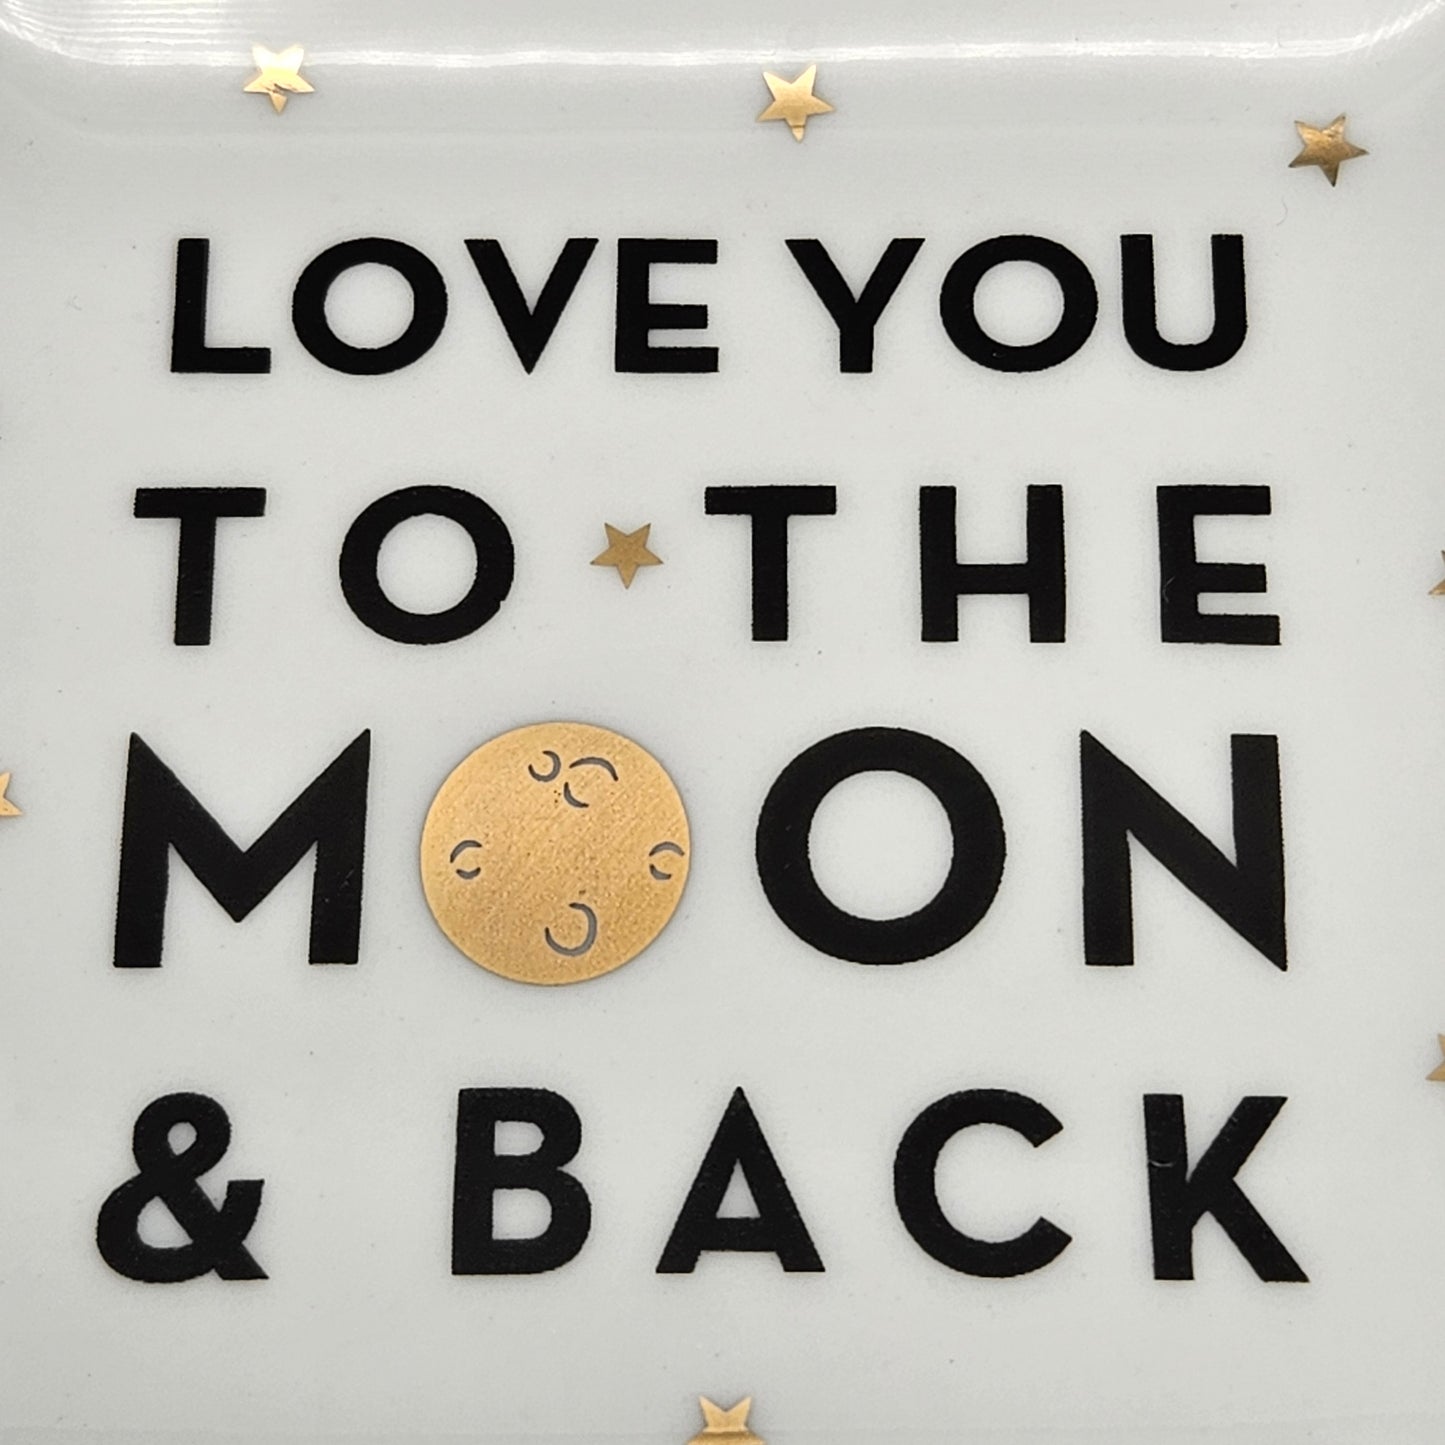 Paper Source "Love You to the Moon and Back" Porcelain Tray